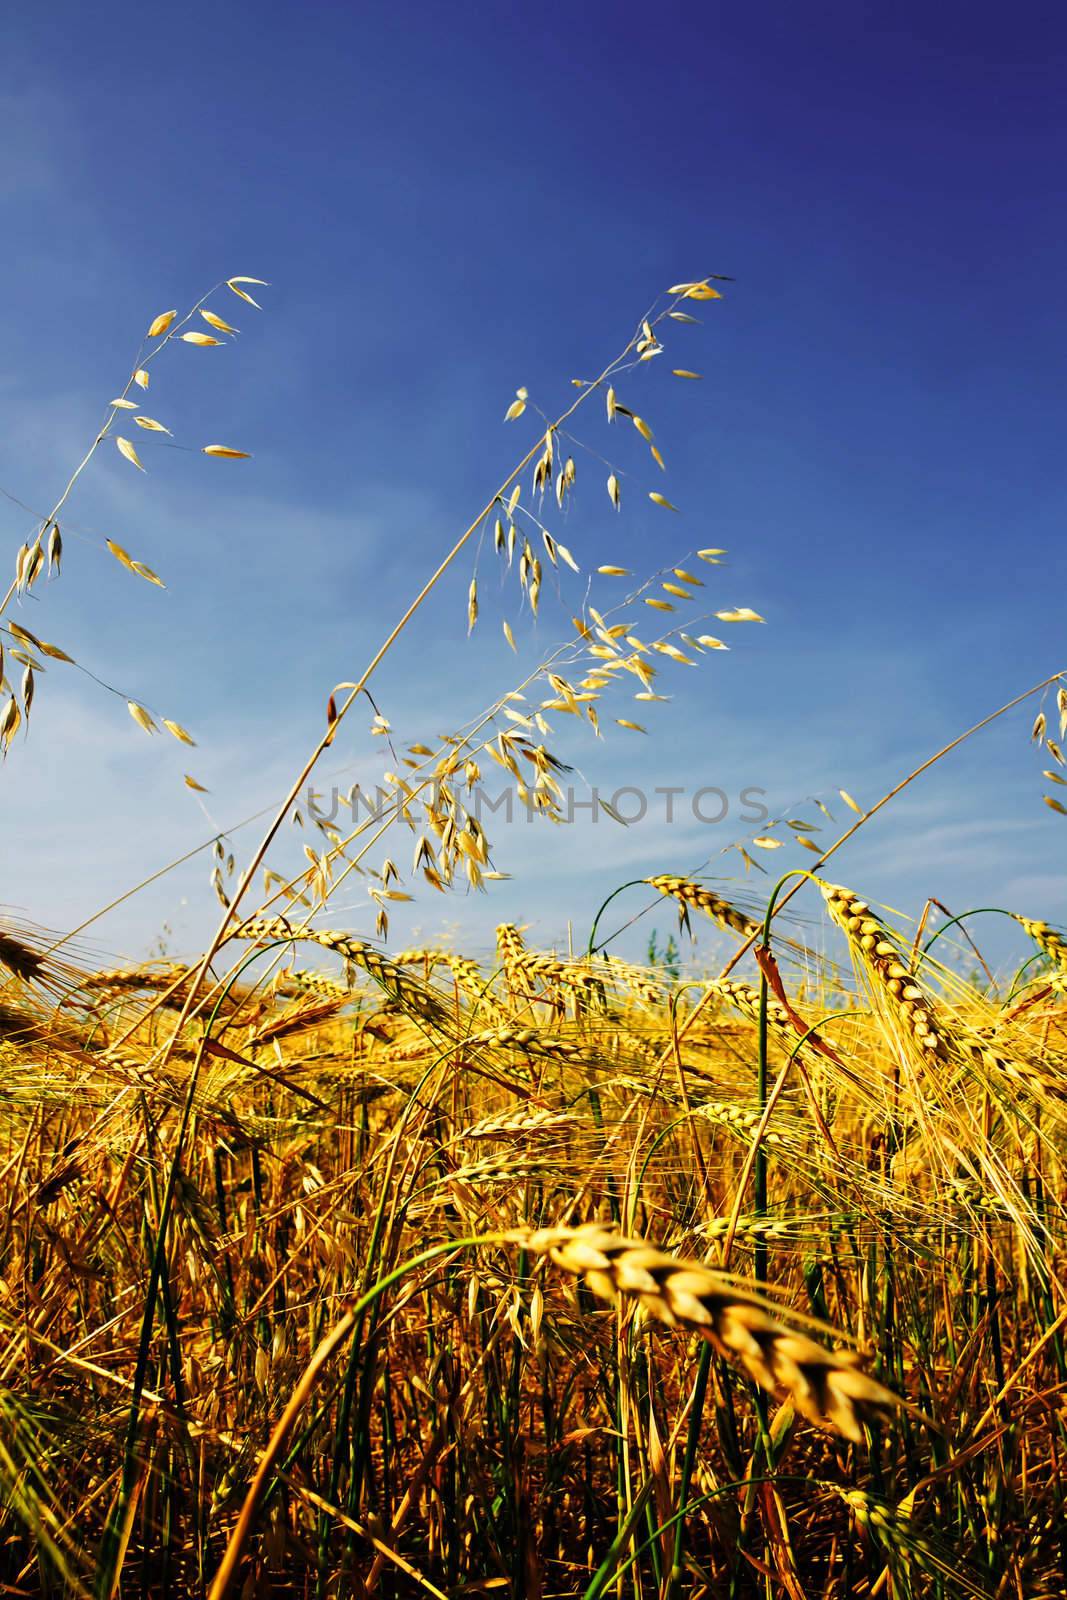 Dramatic hdr rendering of beautiful golden ripe ear of barley against dark blue sky with few diffused white clouds.